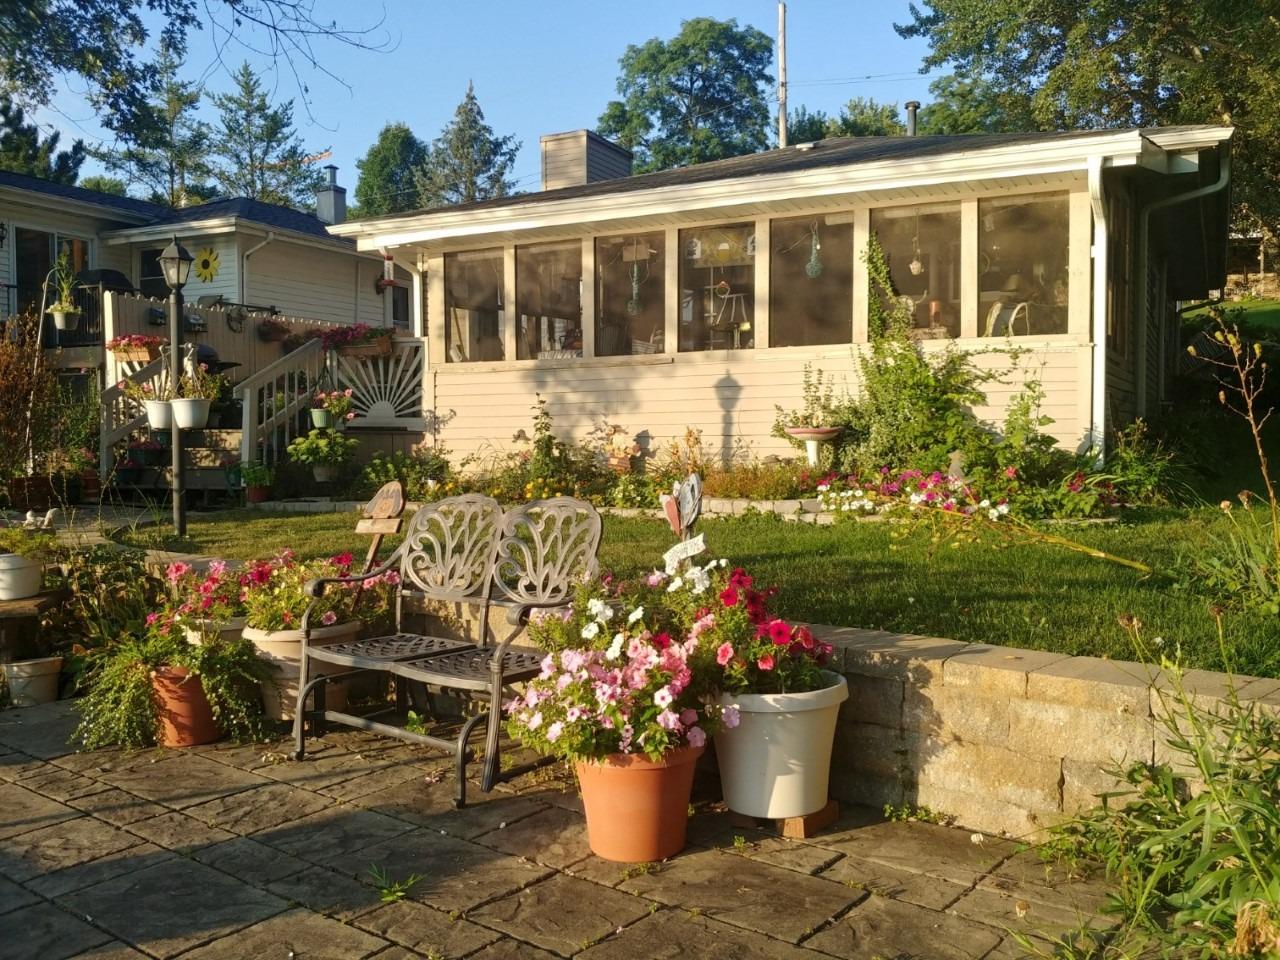 a front view of a house having patio